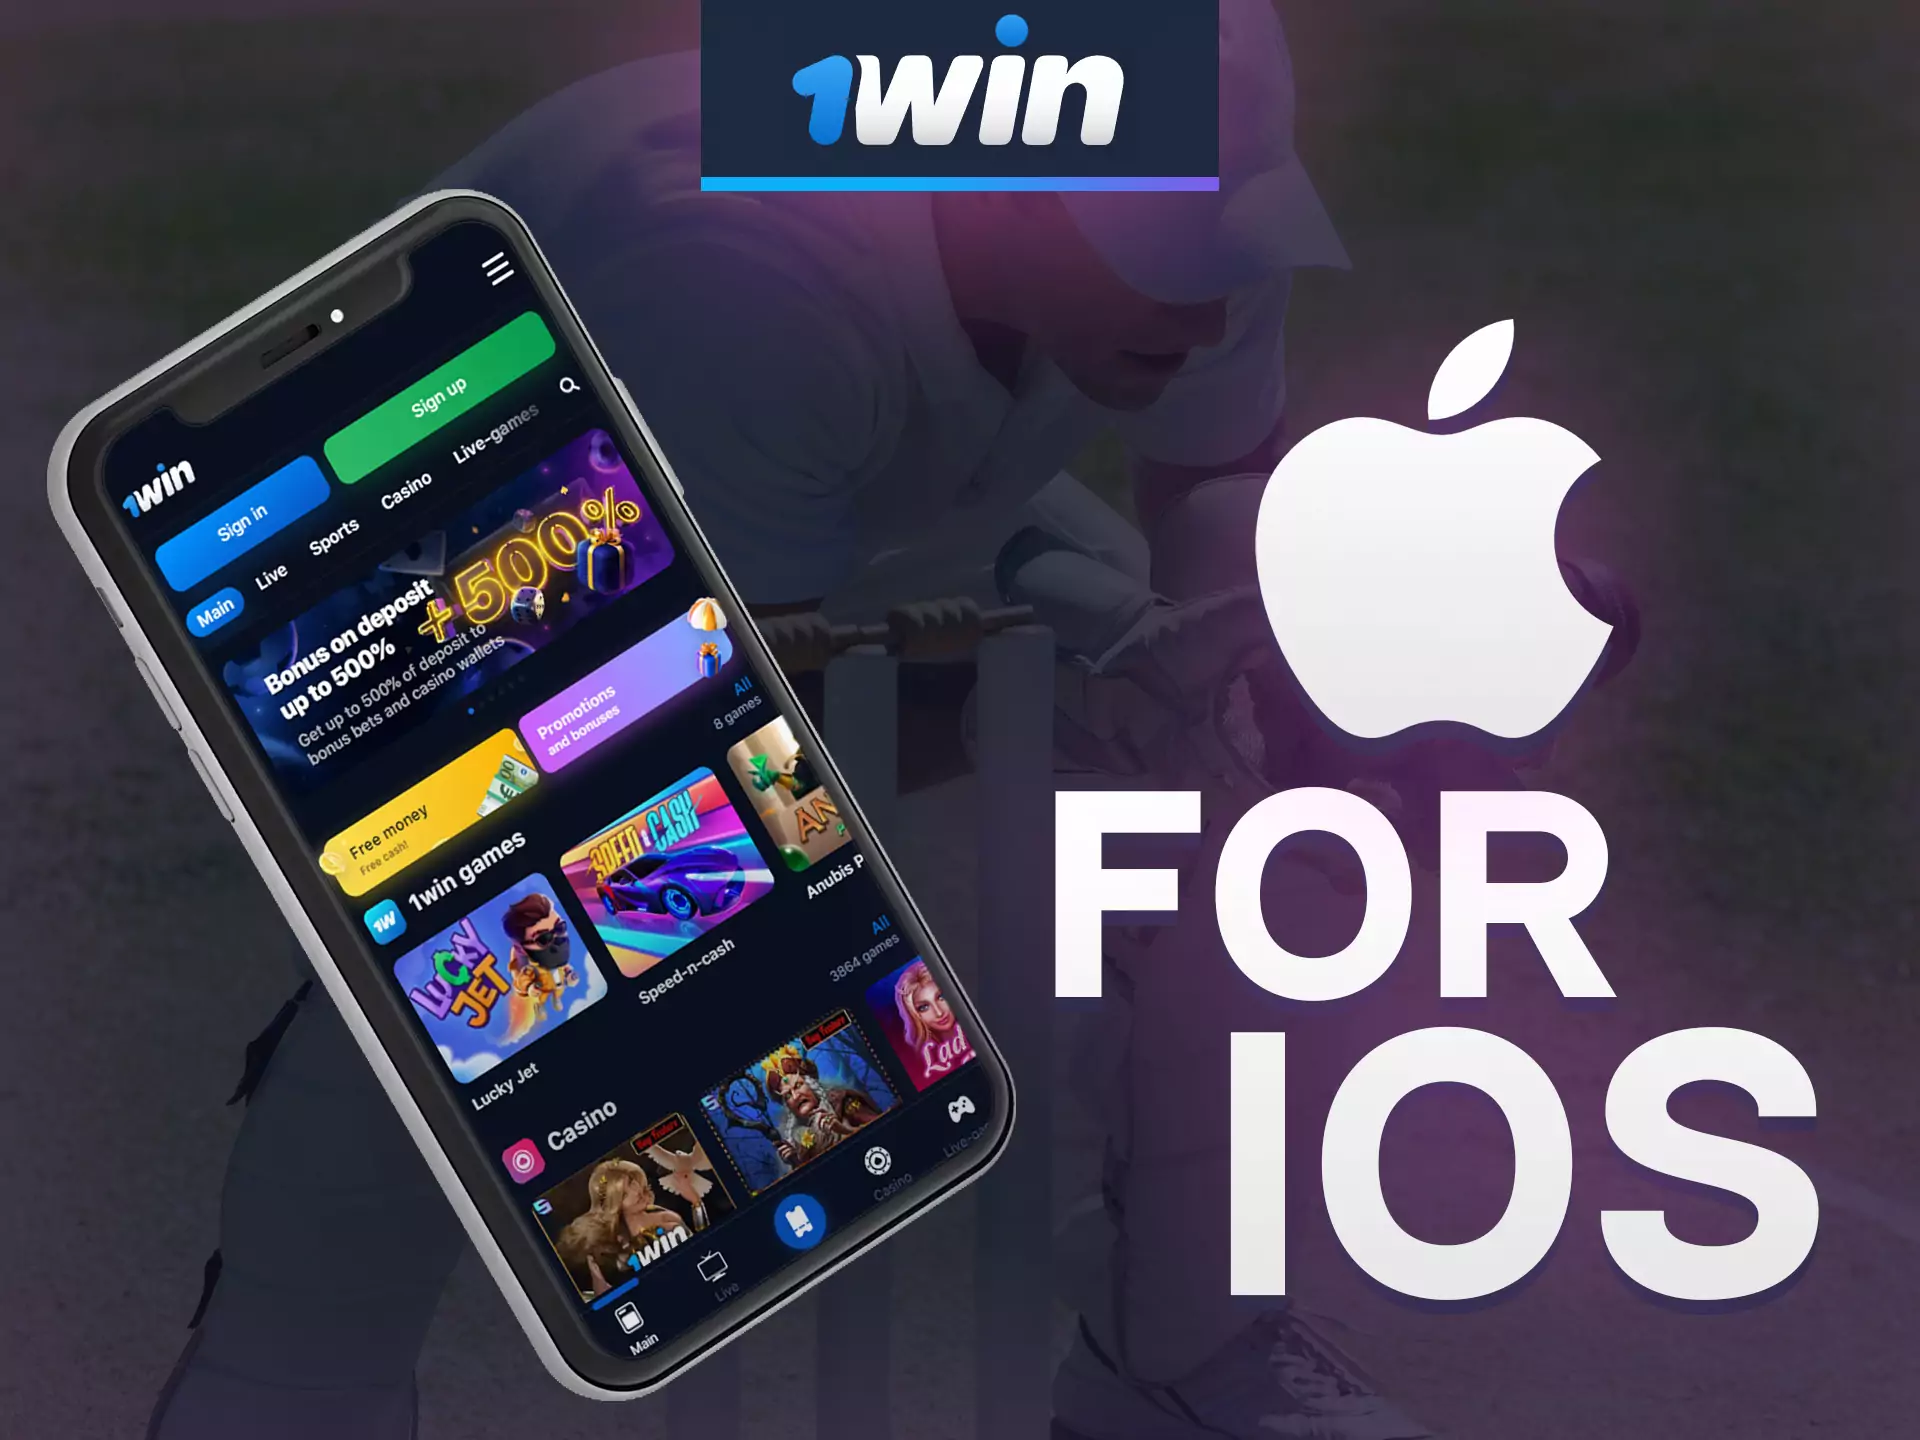 Install 1win iOS app on any of your devices.